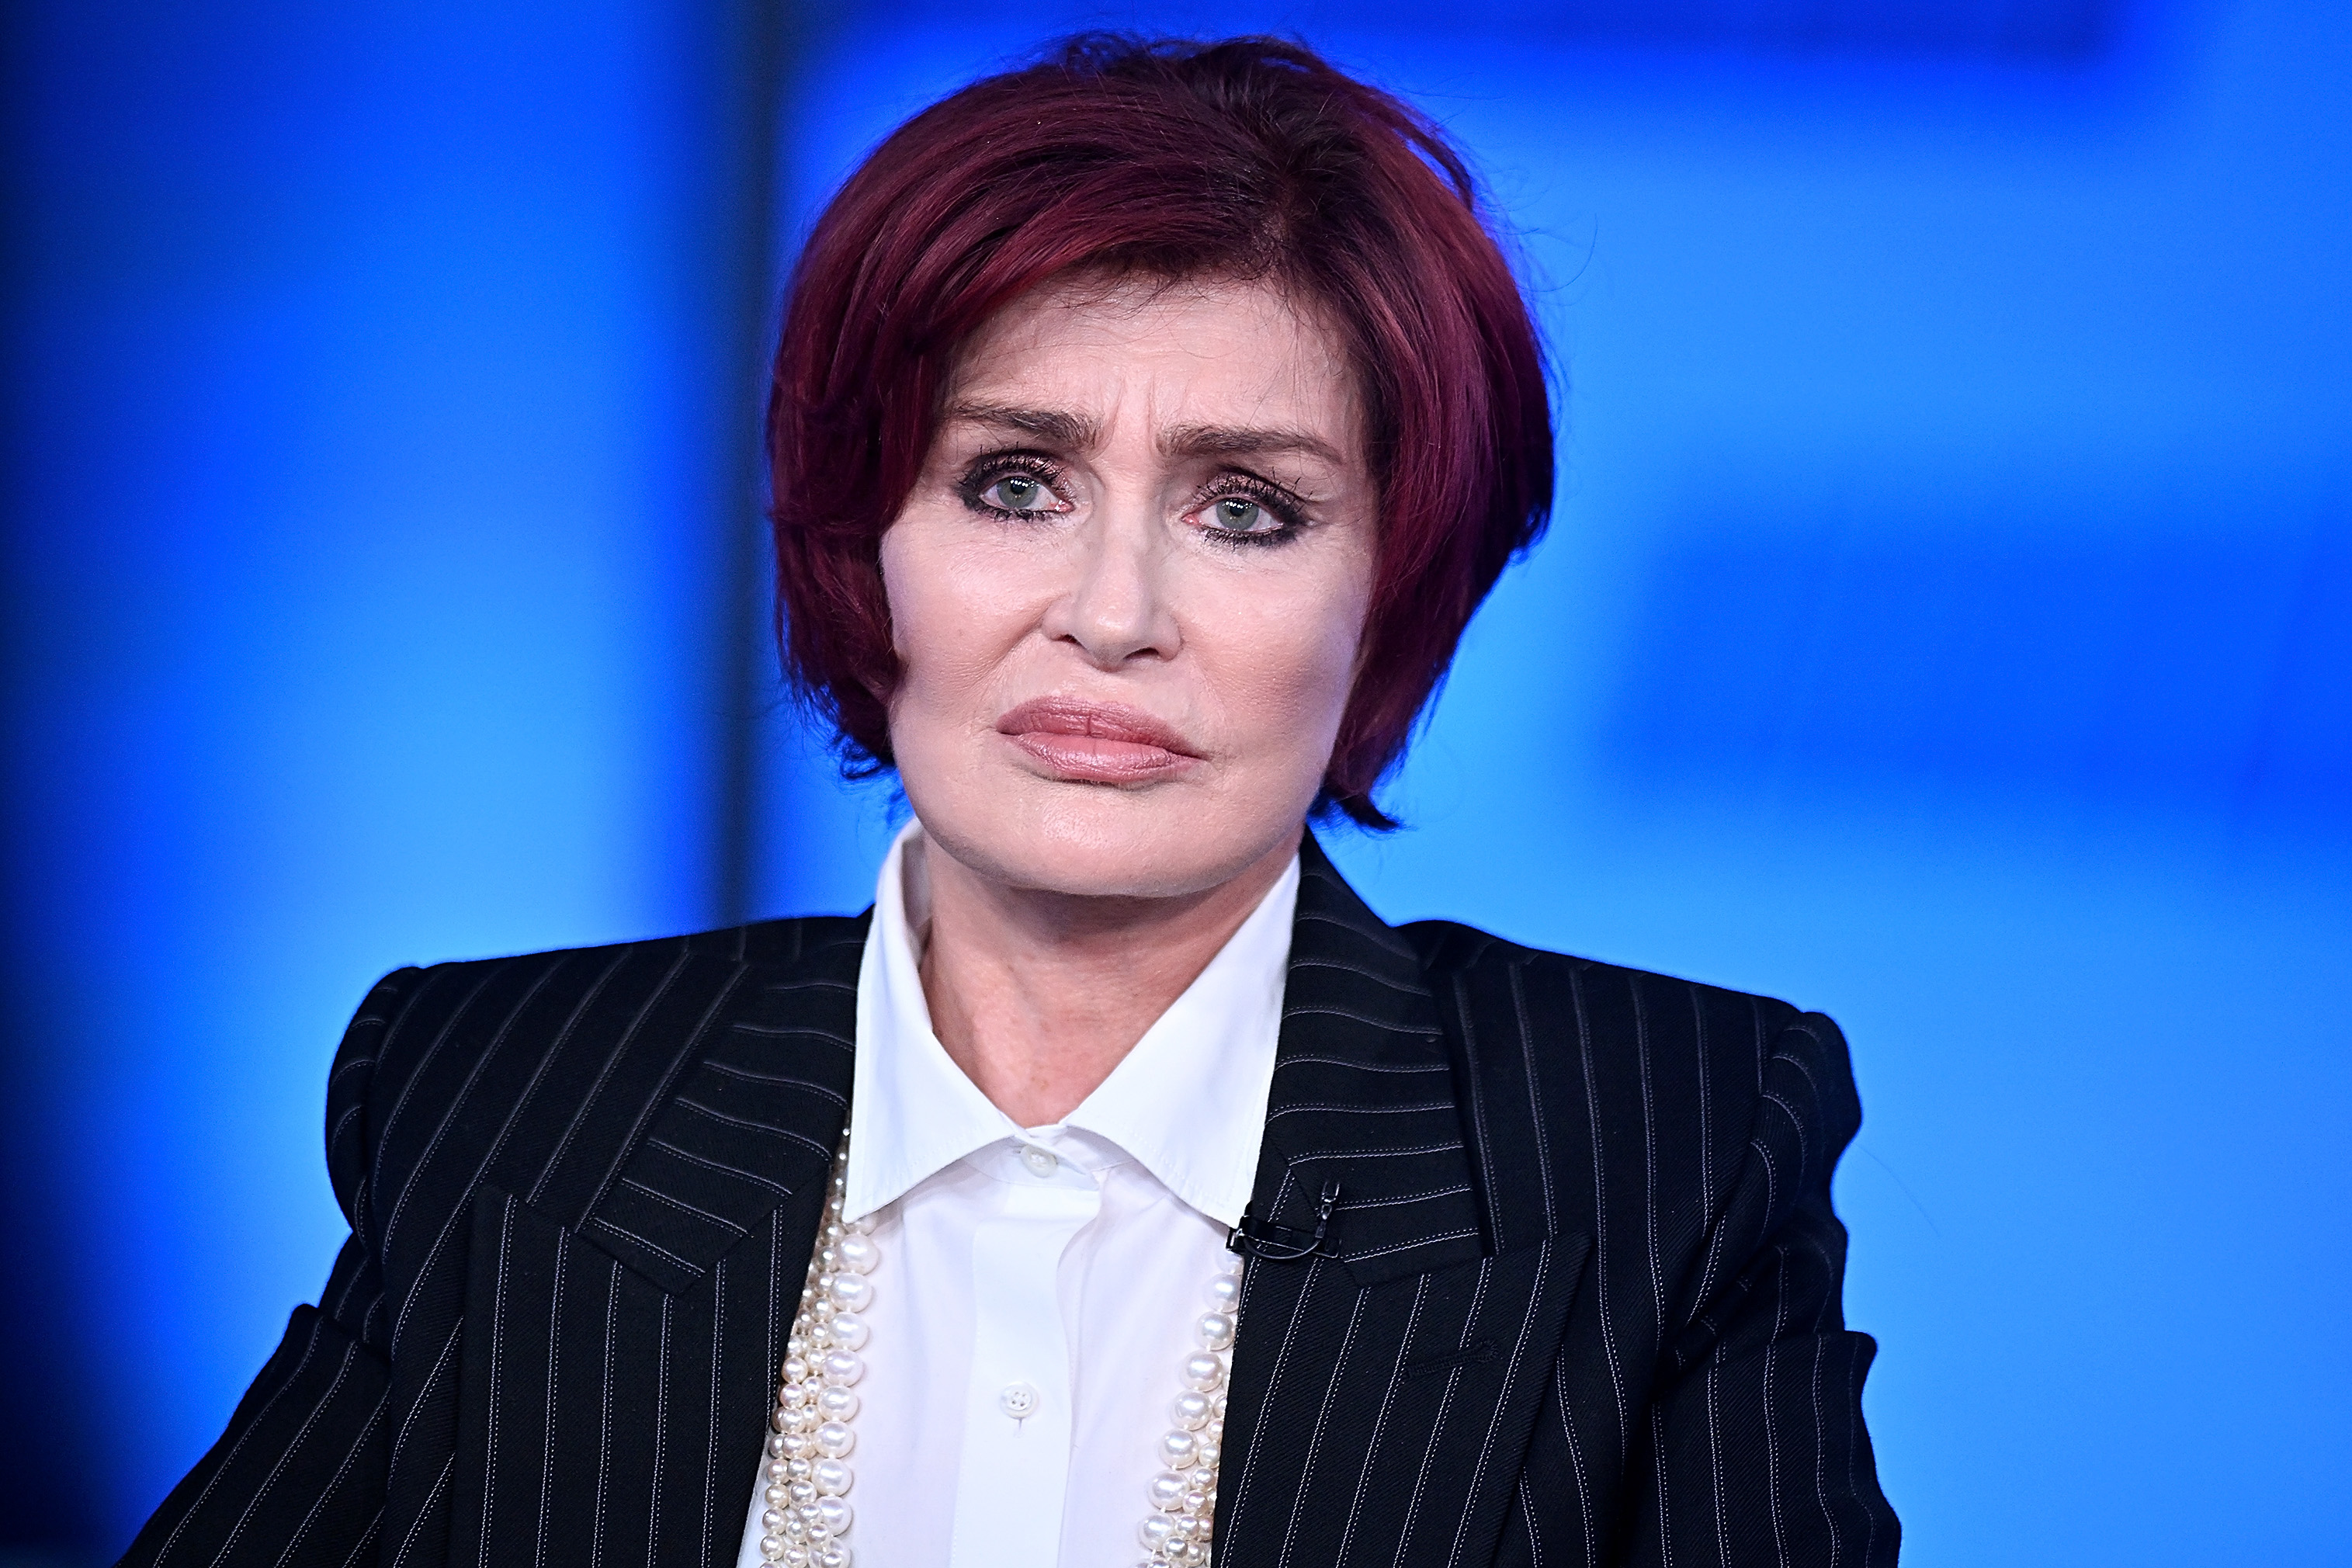 Sharon Osbourne on "The Five" in New York City on September 27, 2022 | Source: Getty Images